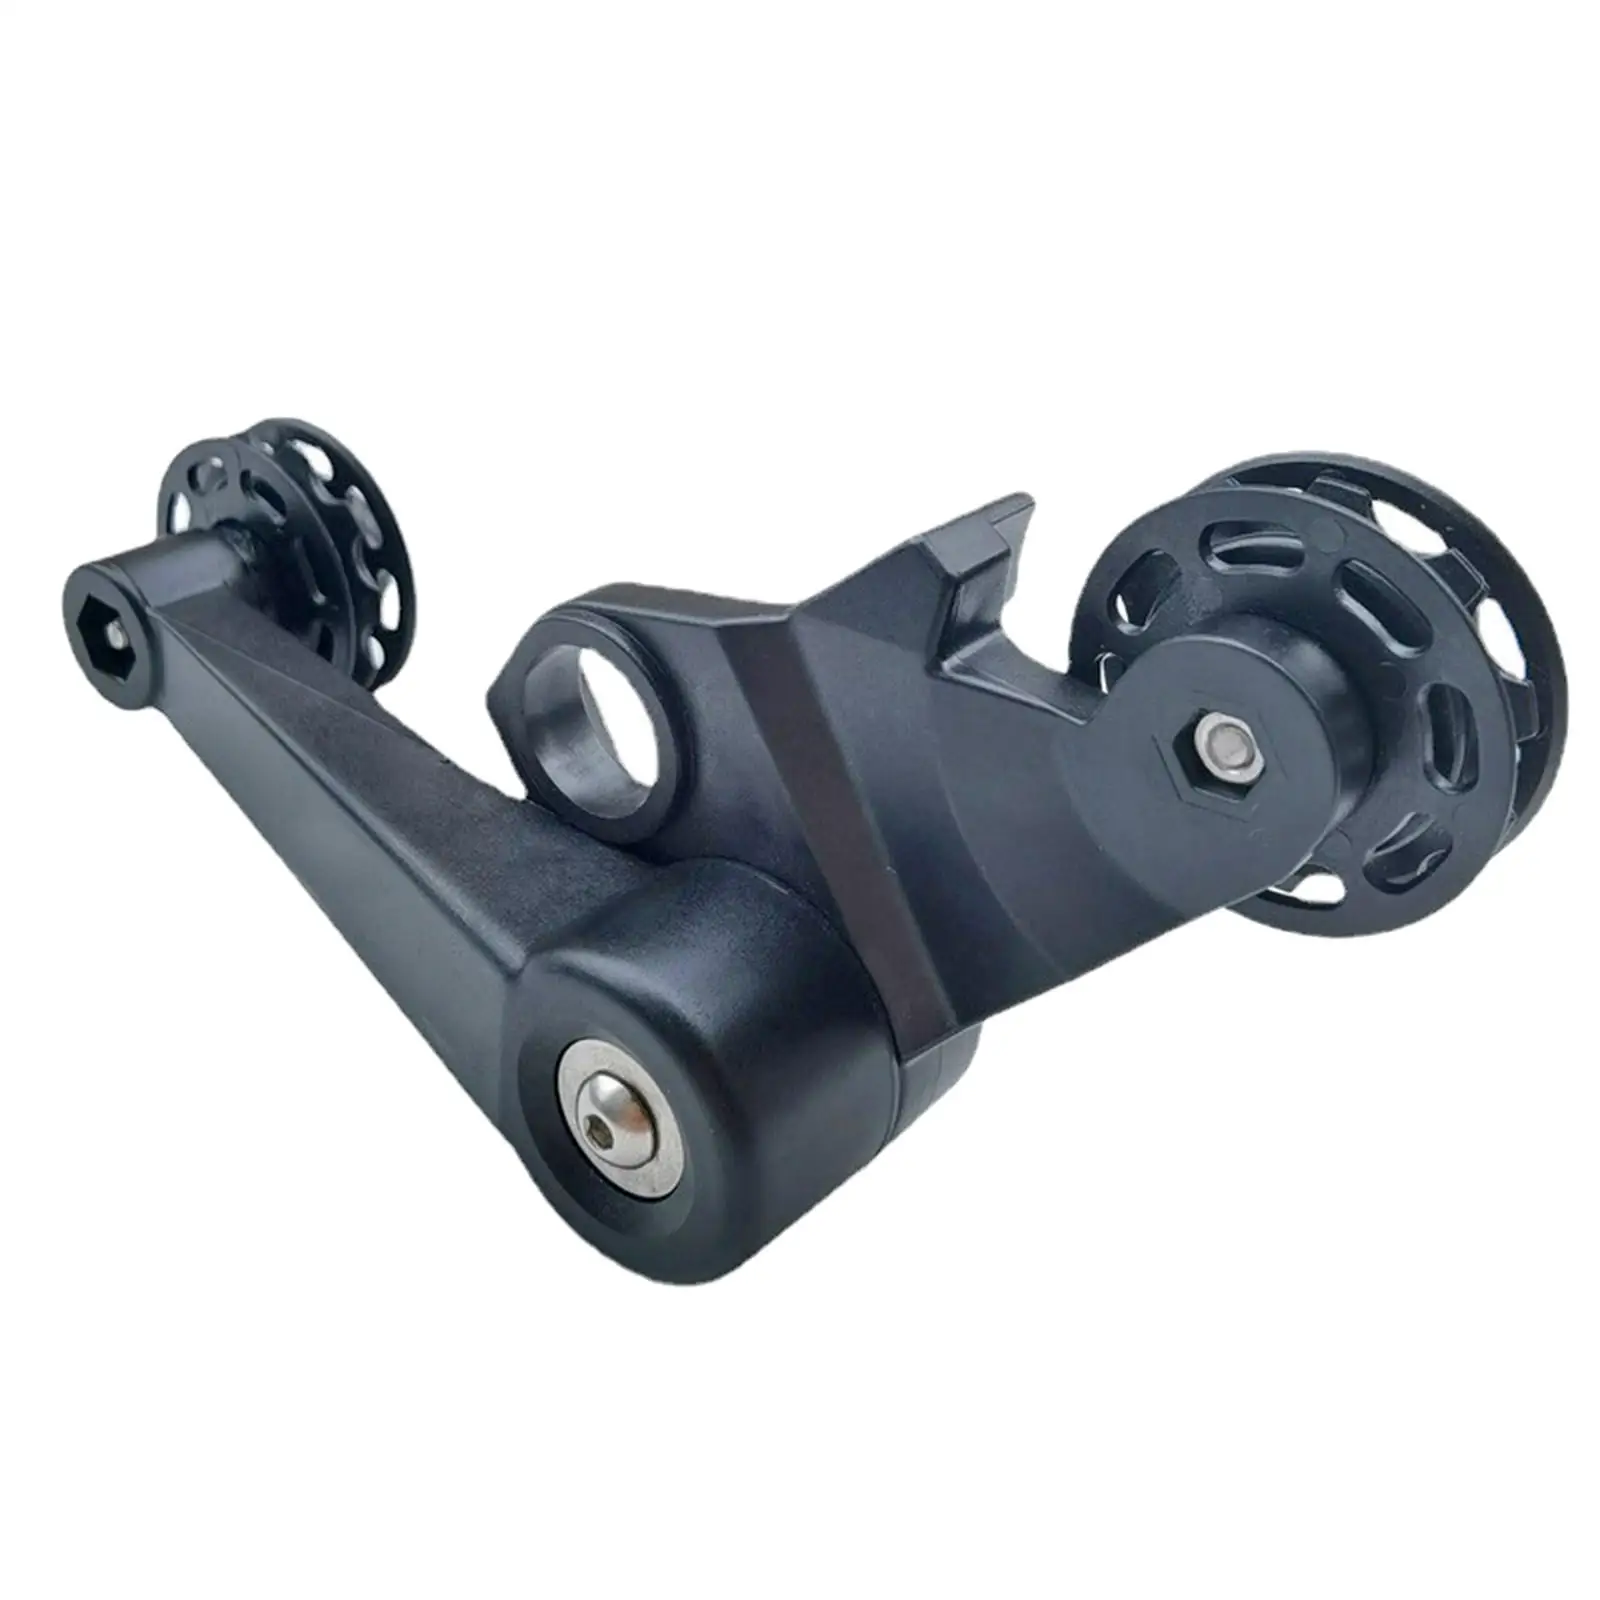 Bike Chain Tensioner Single Speed Lightweight Bicycle Chain Guide Stabilizer for   Replacement Cycling Parts Accessories